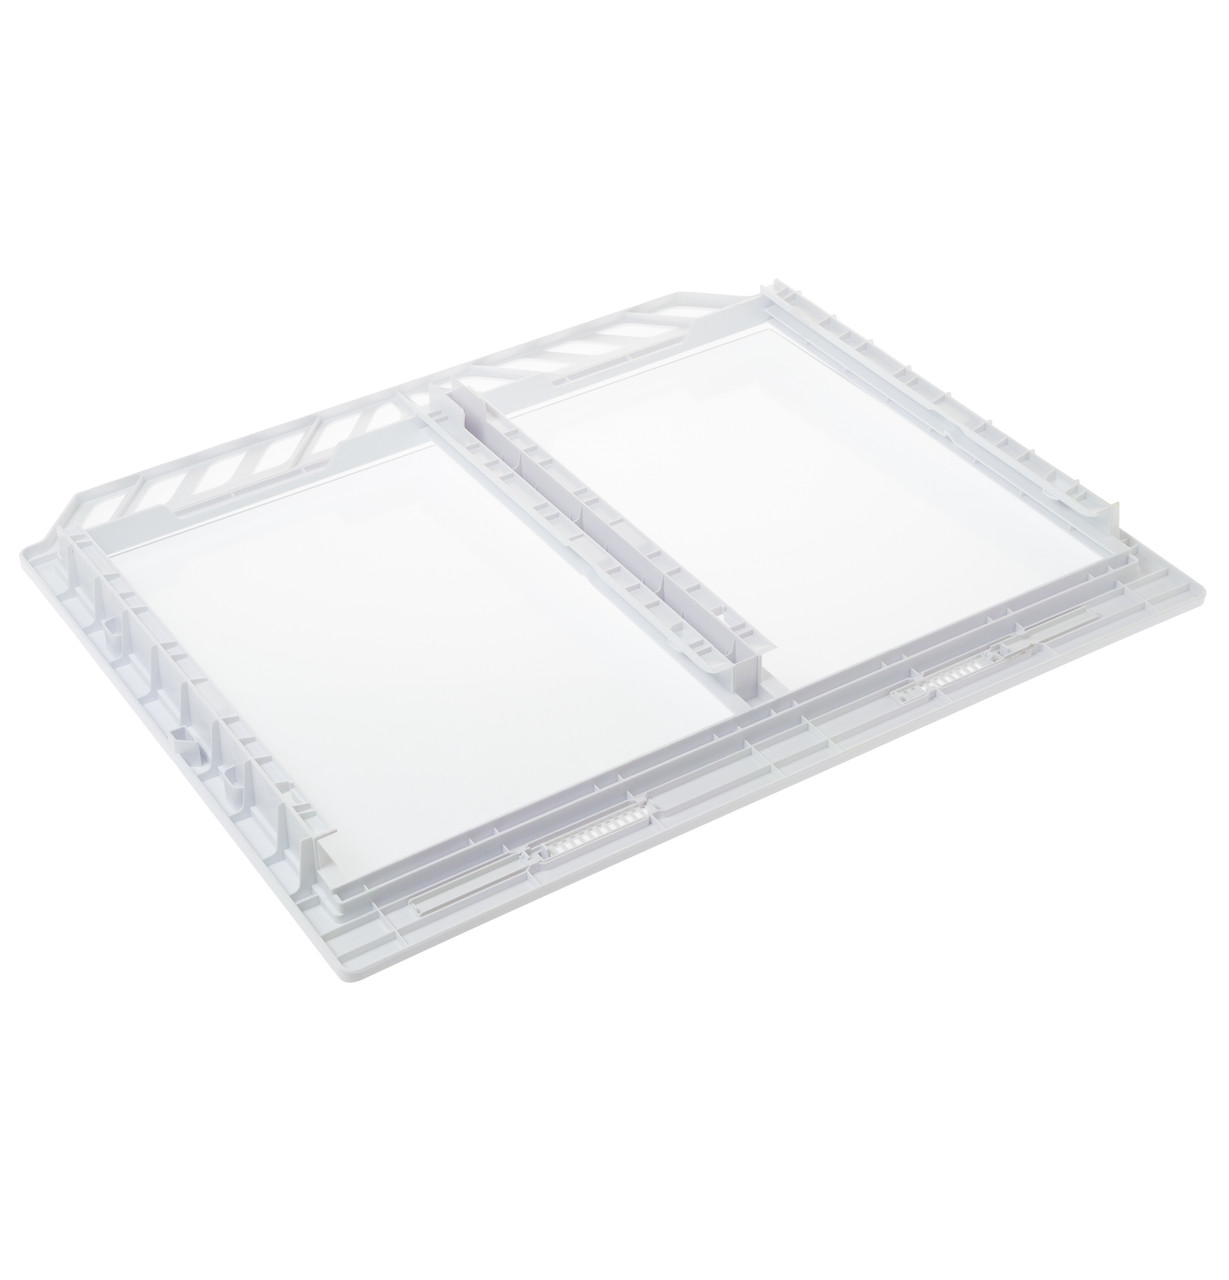 GE Appliances WR71X38751 - Glass Drawer Cover - Image 2